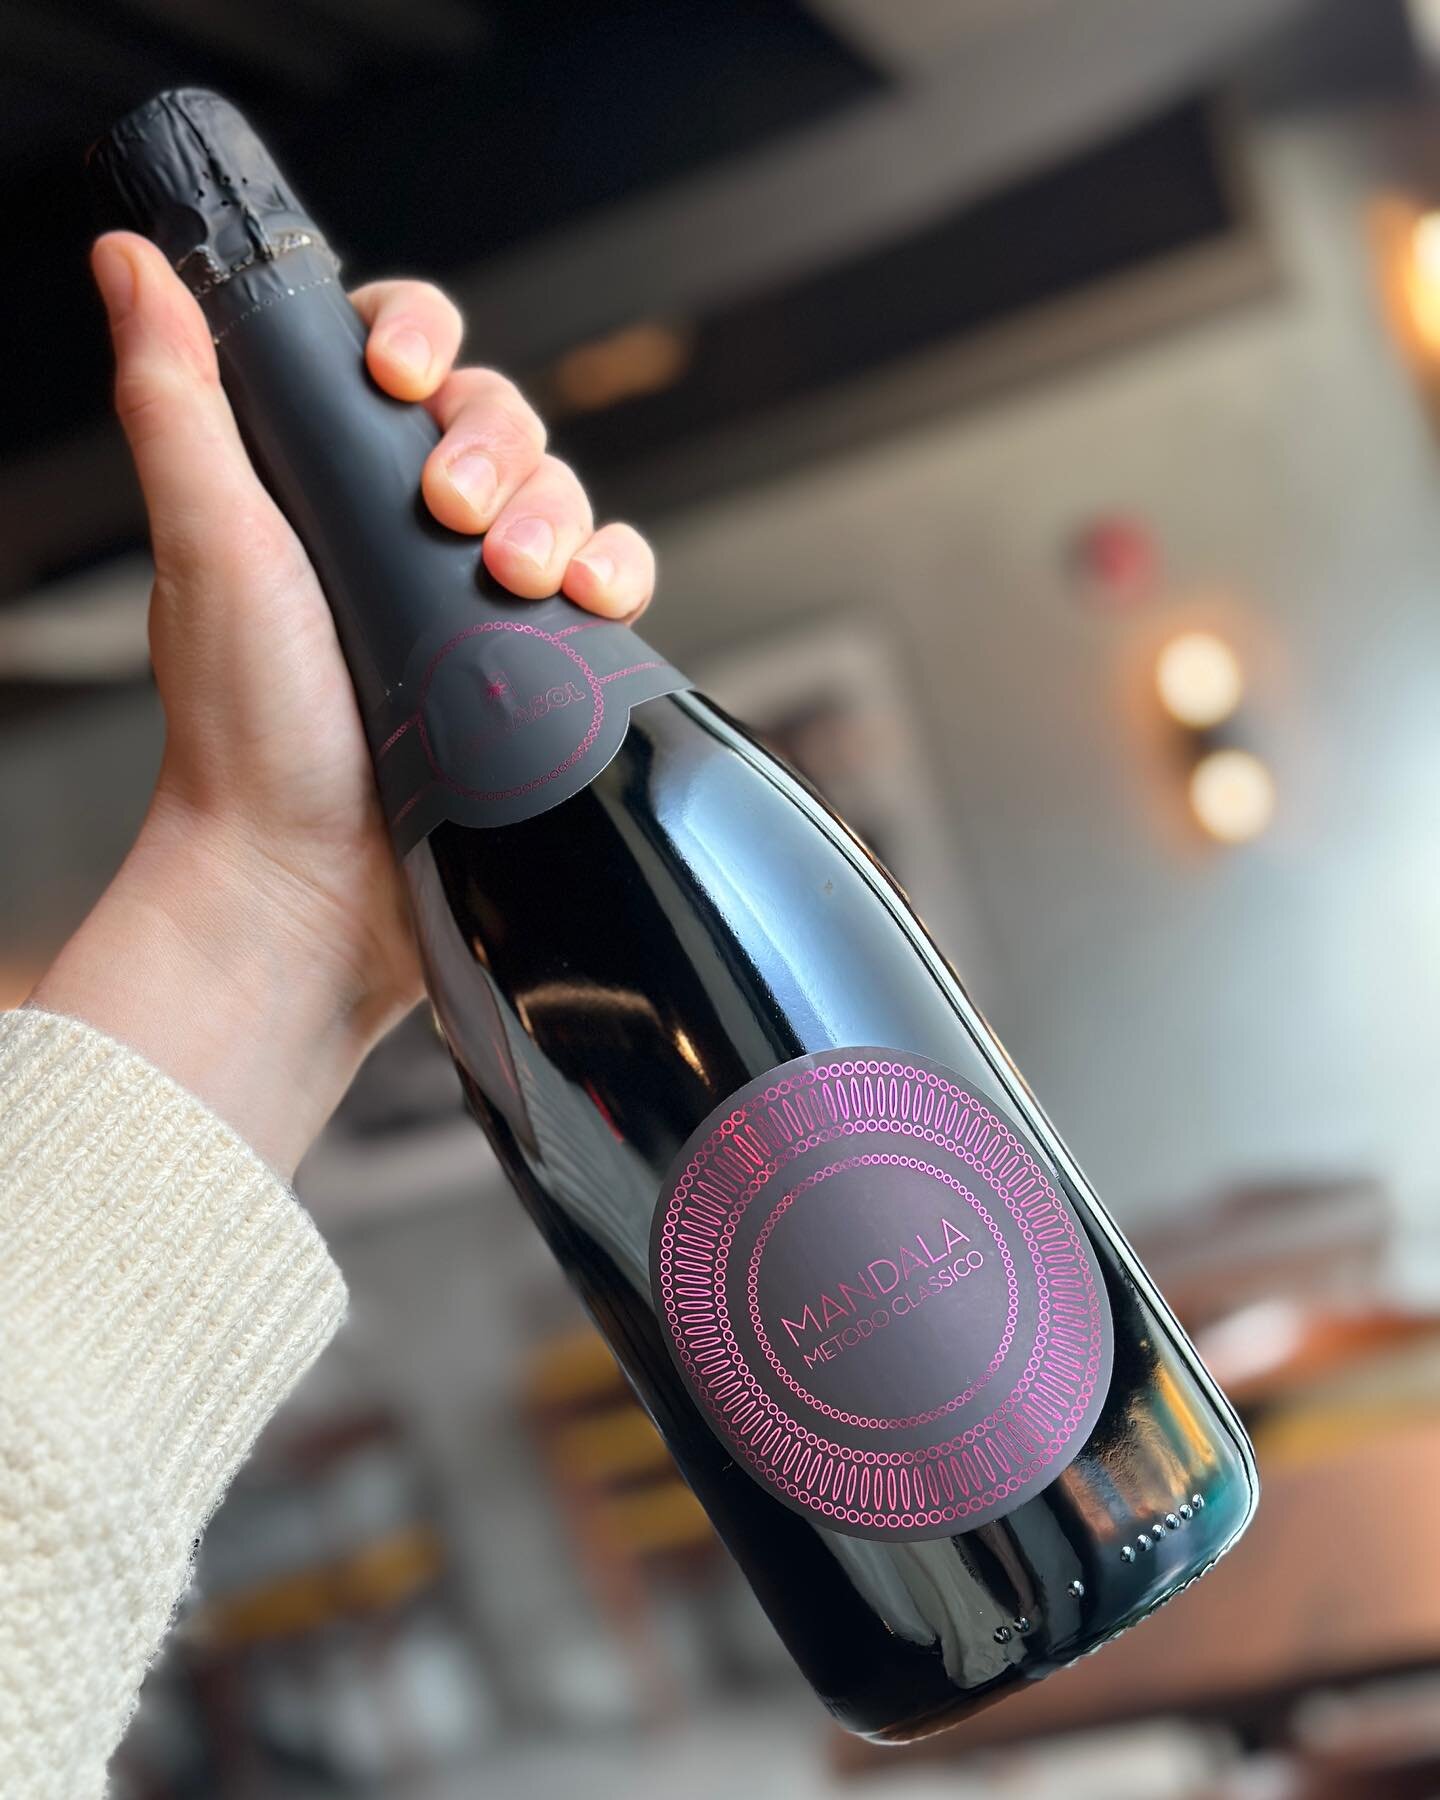 tall, dark &amp; handsome&hellip;is our new sparkling ros&eacute; by the glass 🍷 nero d&rsquo;avola spumante is all about the texture, acidity and pure bright fruits 🍓🍒
&bull;
#bostonbar #naturalwine #naturalwines #naturalwineshop #naturalwinelove